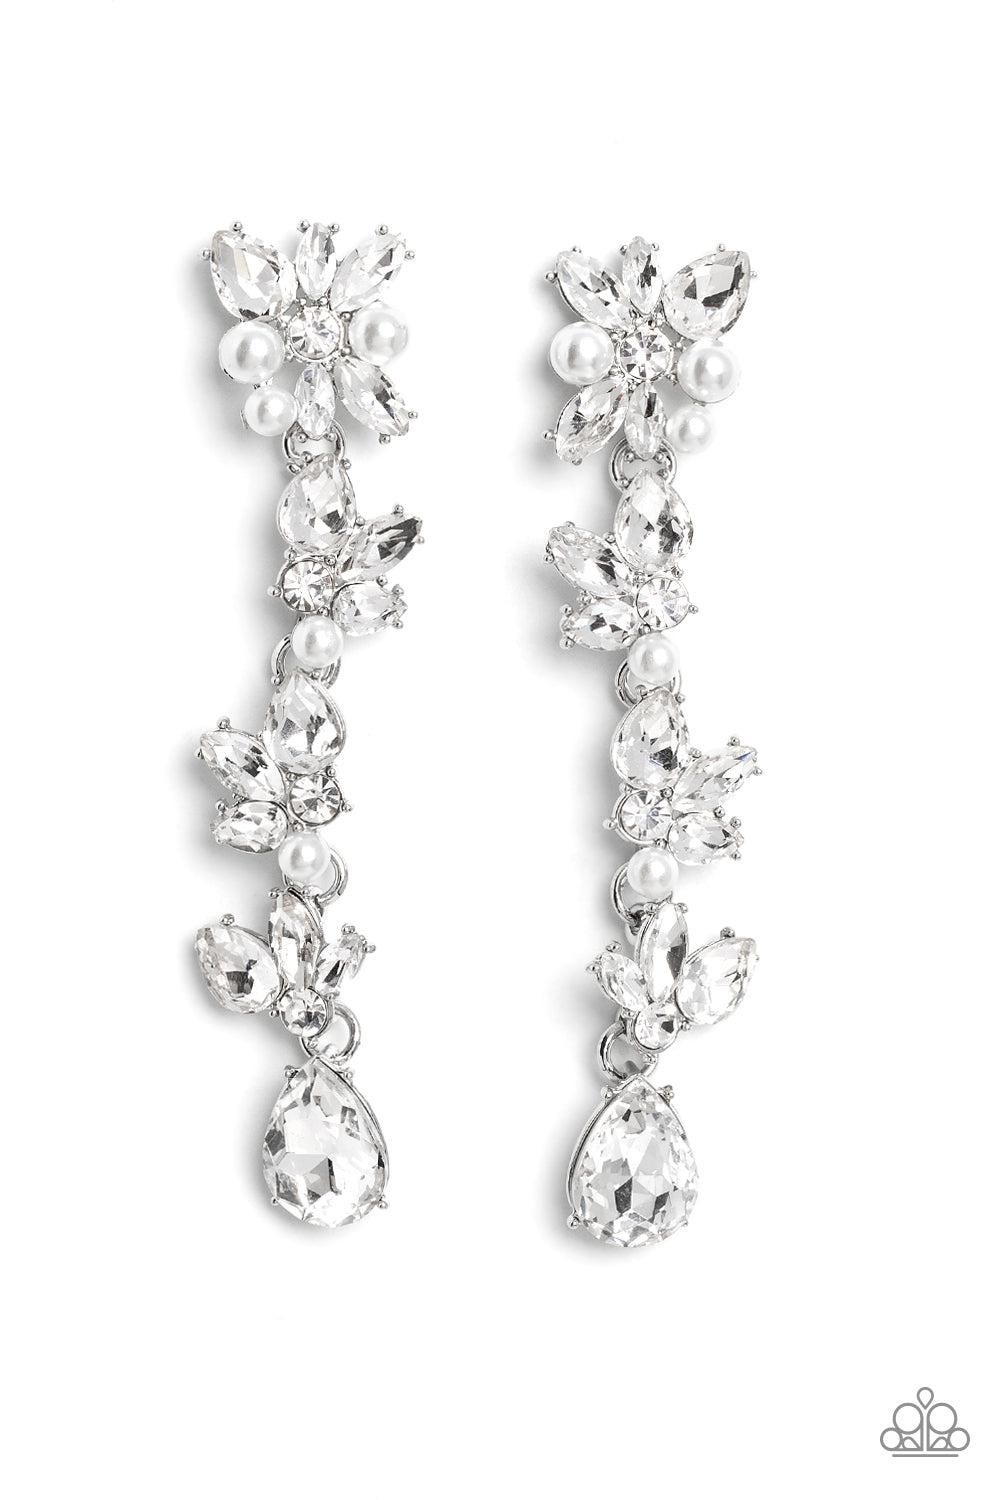 LIGHT at the Opera White Rhinestone &amp; Pearl Earrings - Paparazzi Accessories- lightbox - CarasShop.com - $5 Jewelry by Cara Jewels